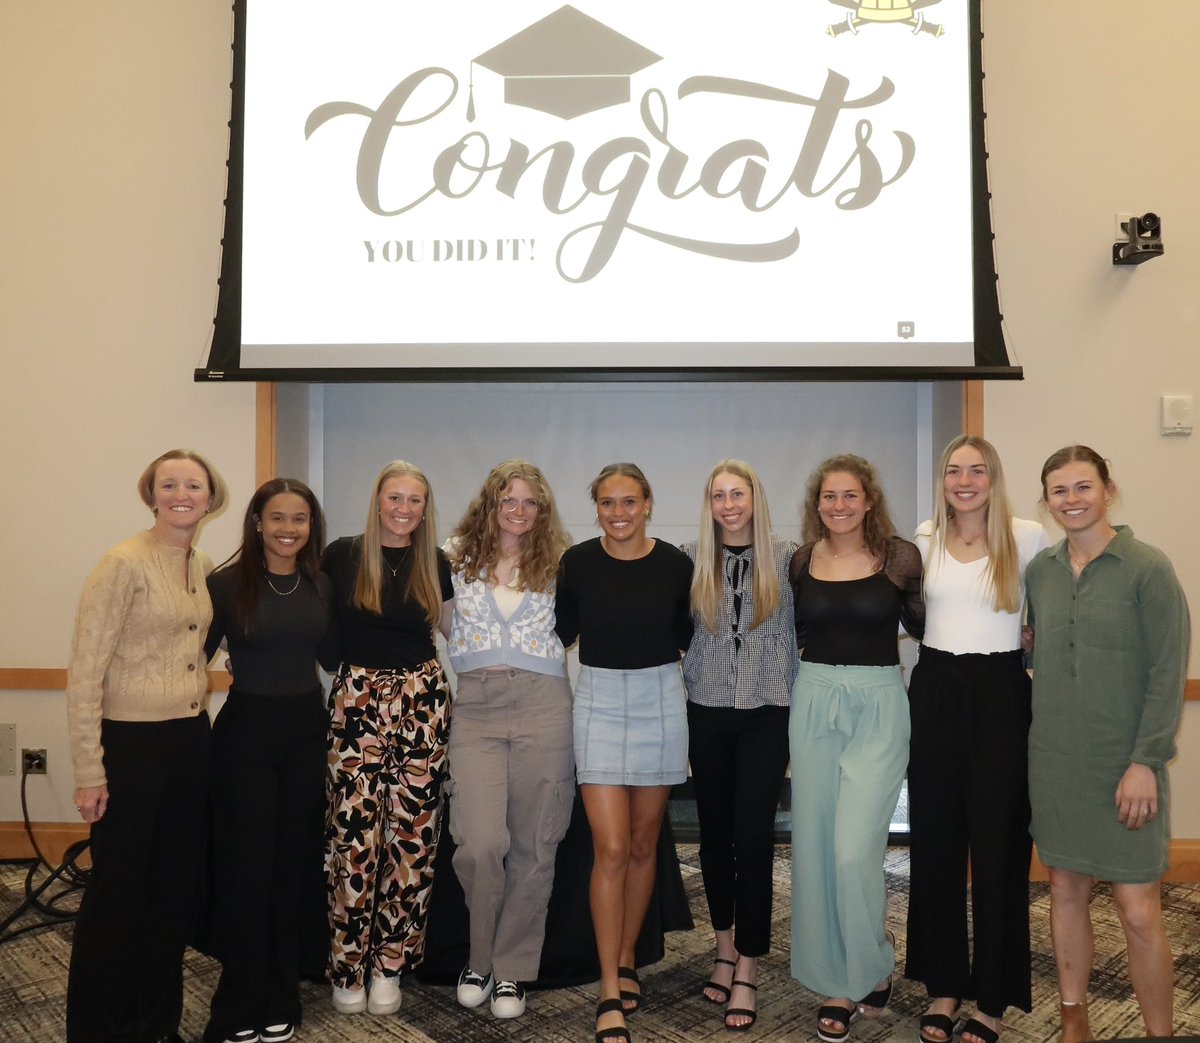 Celebrating the accomplishments of our graduating seniors! We are so proud of the hard work they’ve put in on and off the field🎓 #NORSEUP | @NKUNorse